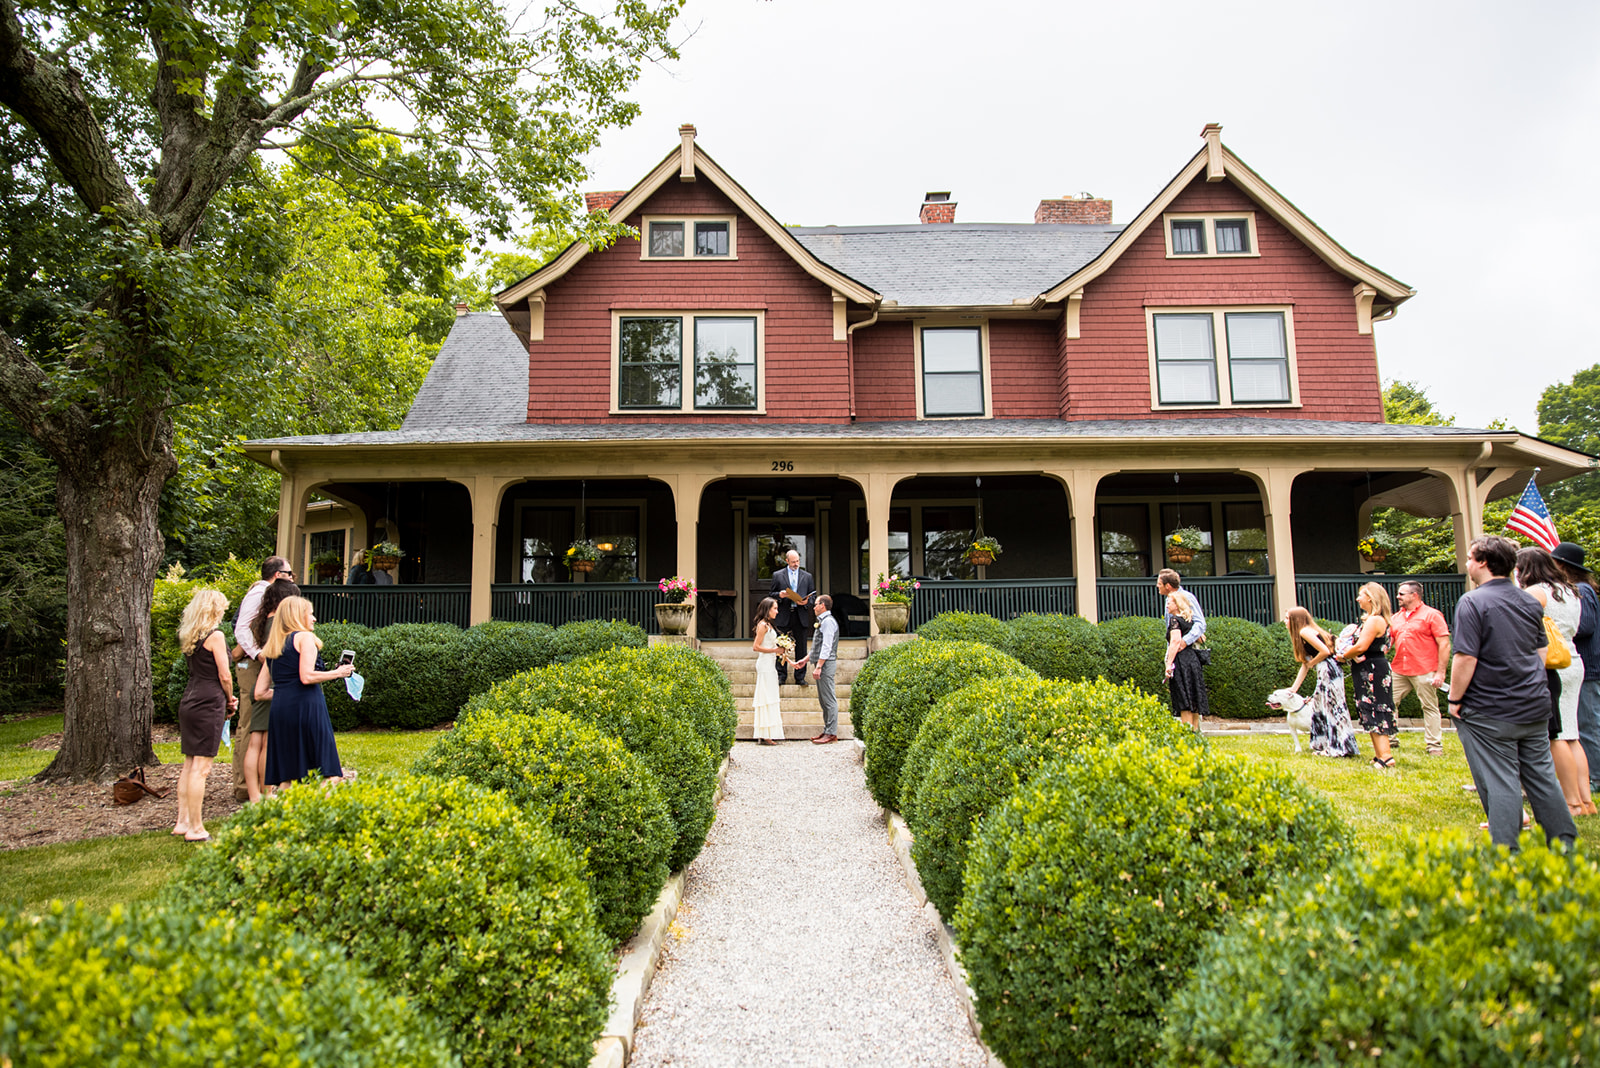 An intimate wedding ceremony at the Asheville bed and breakafst. The couple standing at the feet of the front porch, surrounded by guests scattered across the front yard.